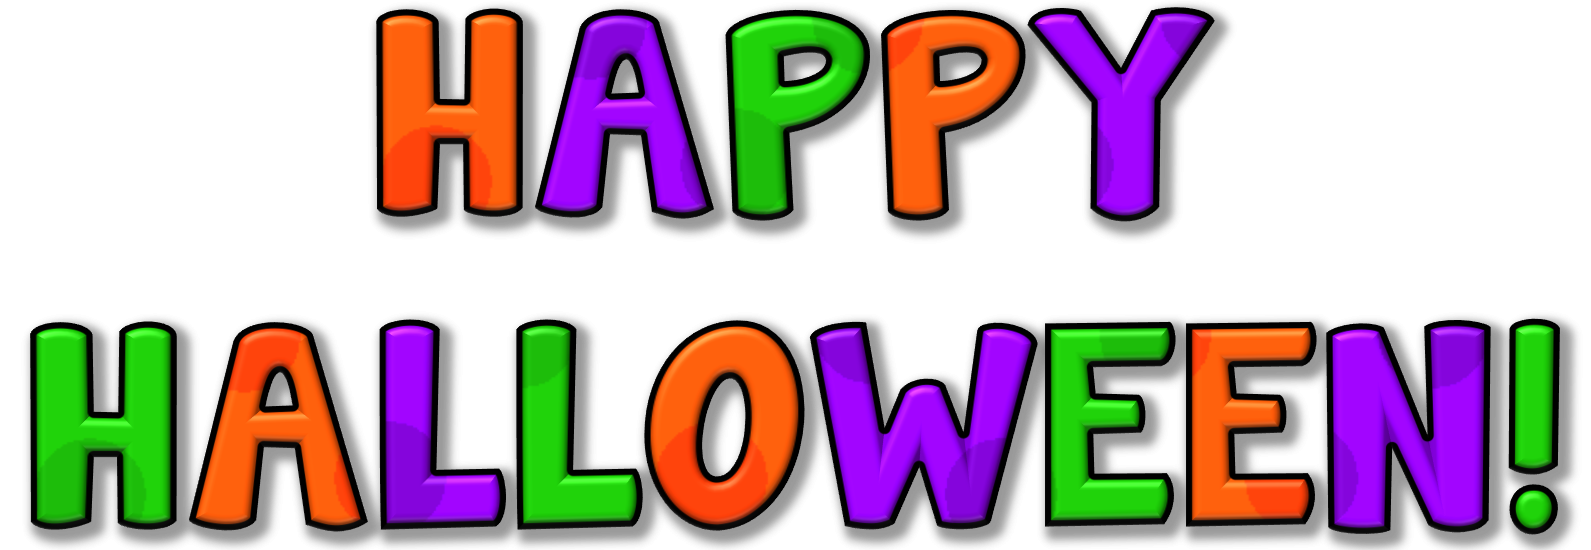 happy halloween clipart transparent - Clipground